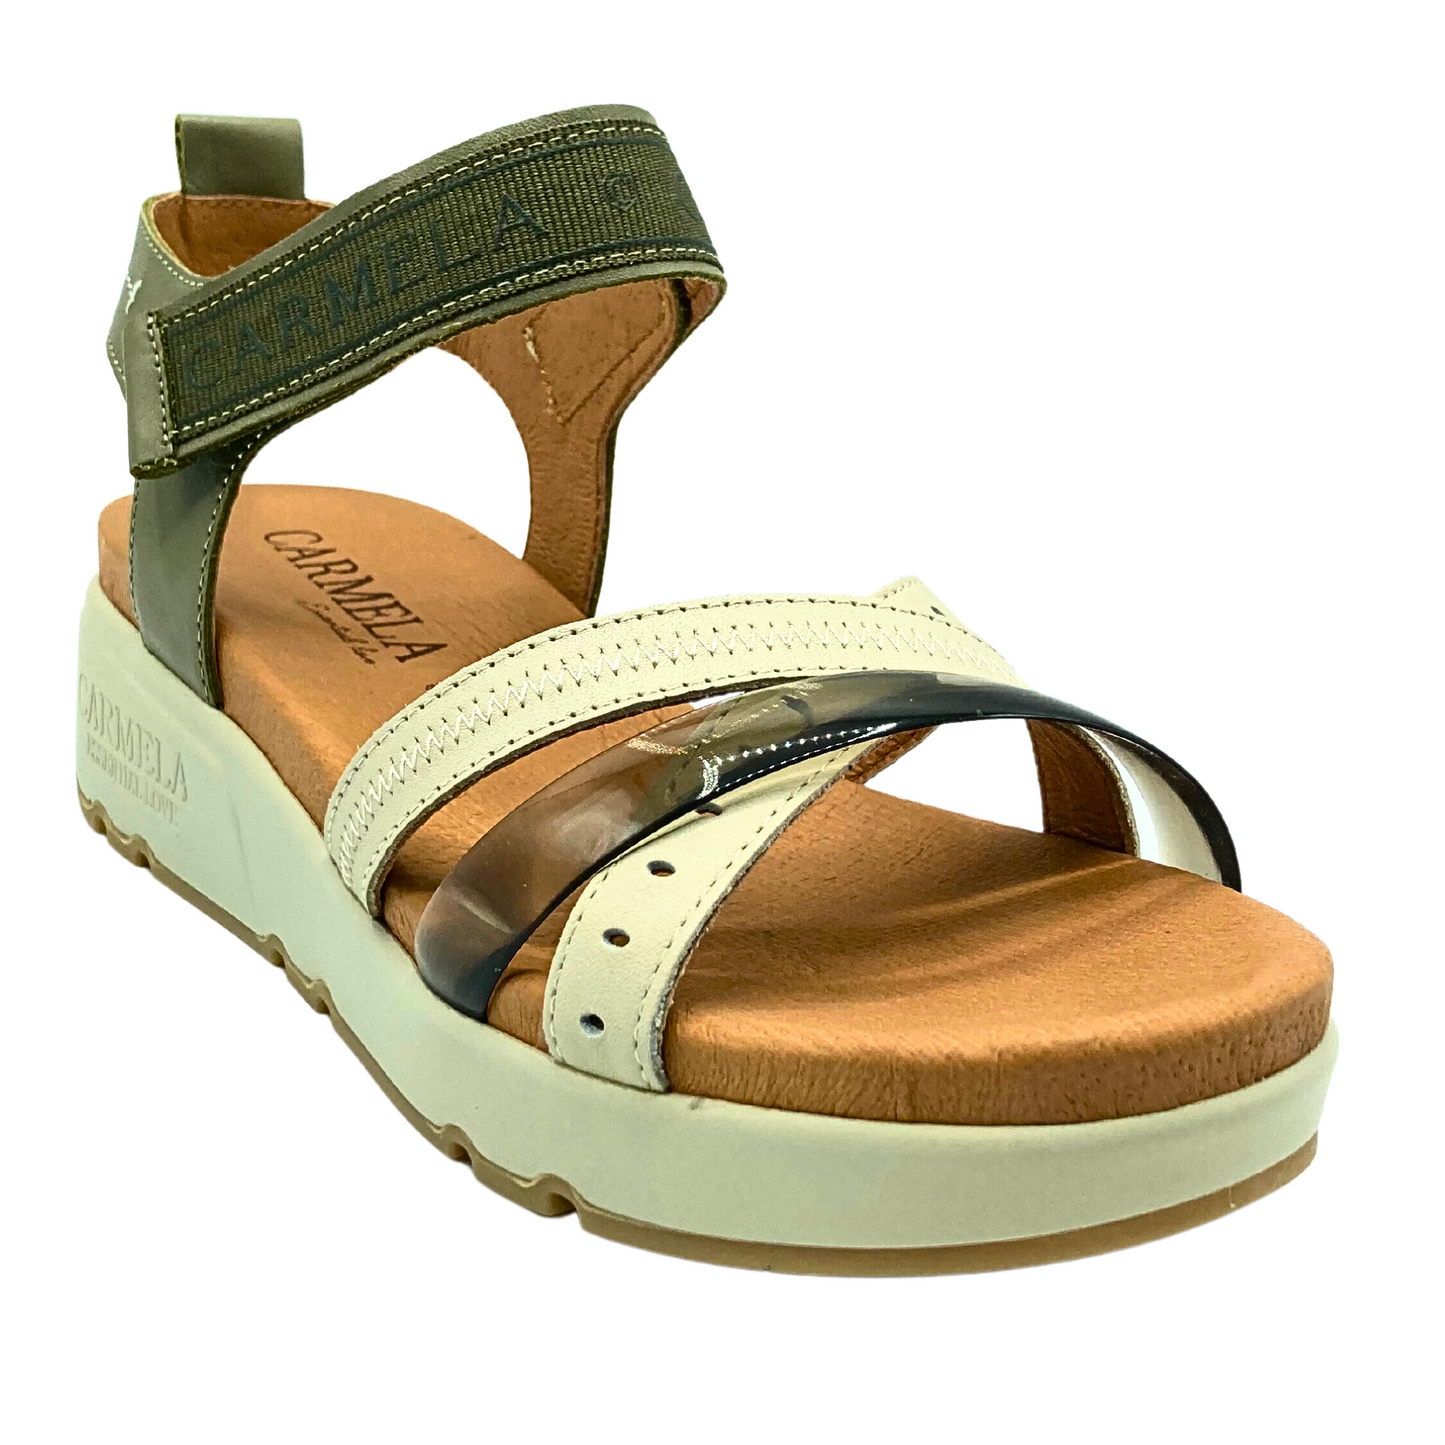 Angled front view of a low wedge sandal done in cream and khaki